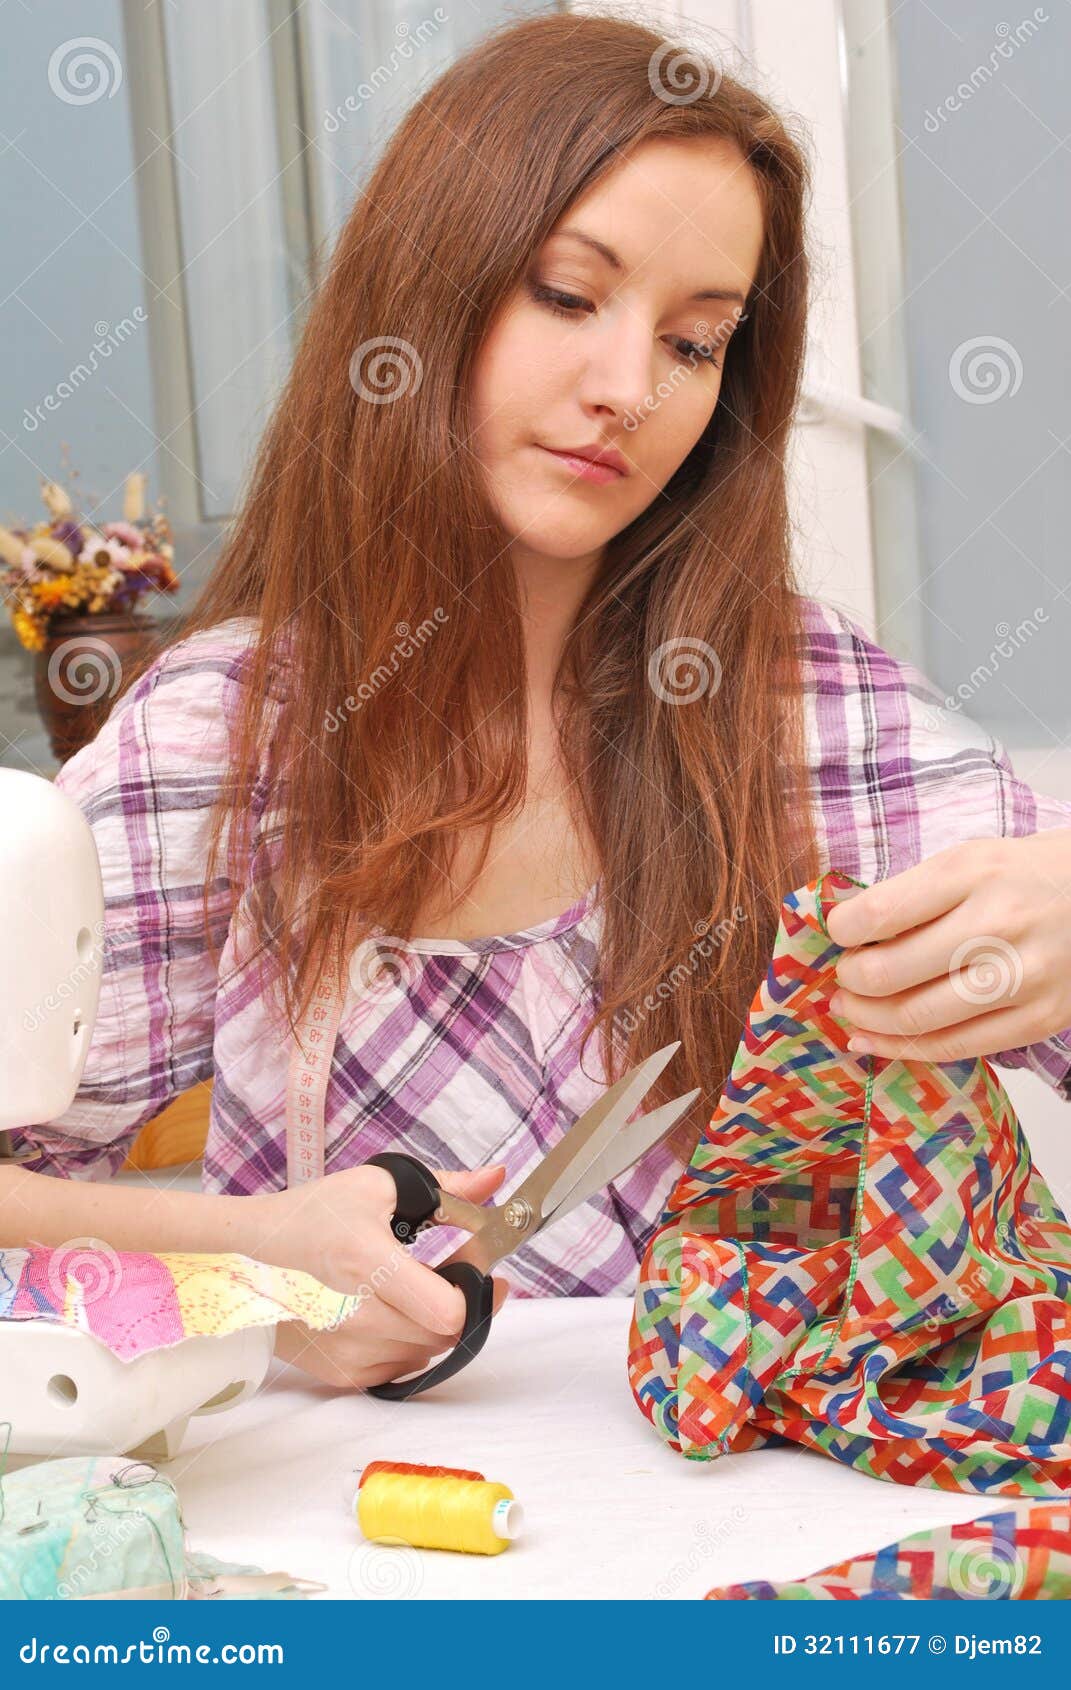 Woman cut garment and work stock image. Image of industry - 32111677